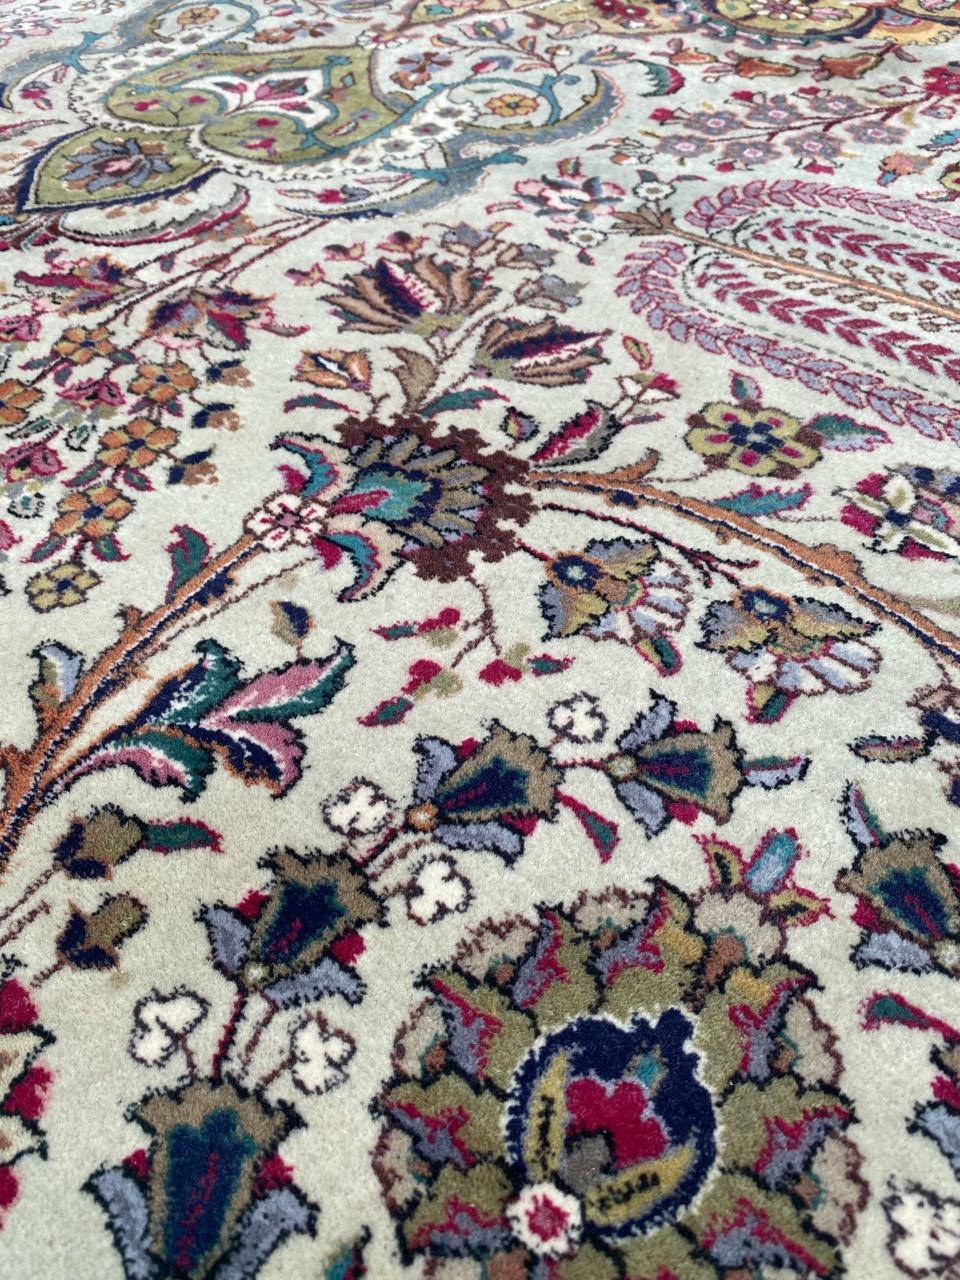 Very beautiful vintage extremely fine tabriz rug with nice floral design and beautiful colors, entirely and very finely hand knotted with wool velvet on cotton foundation.

✨✨✨
